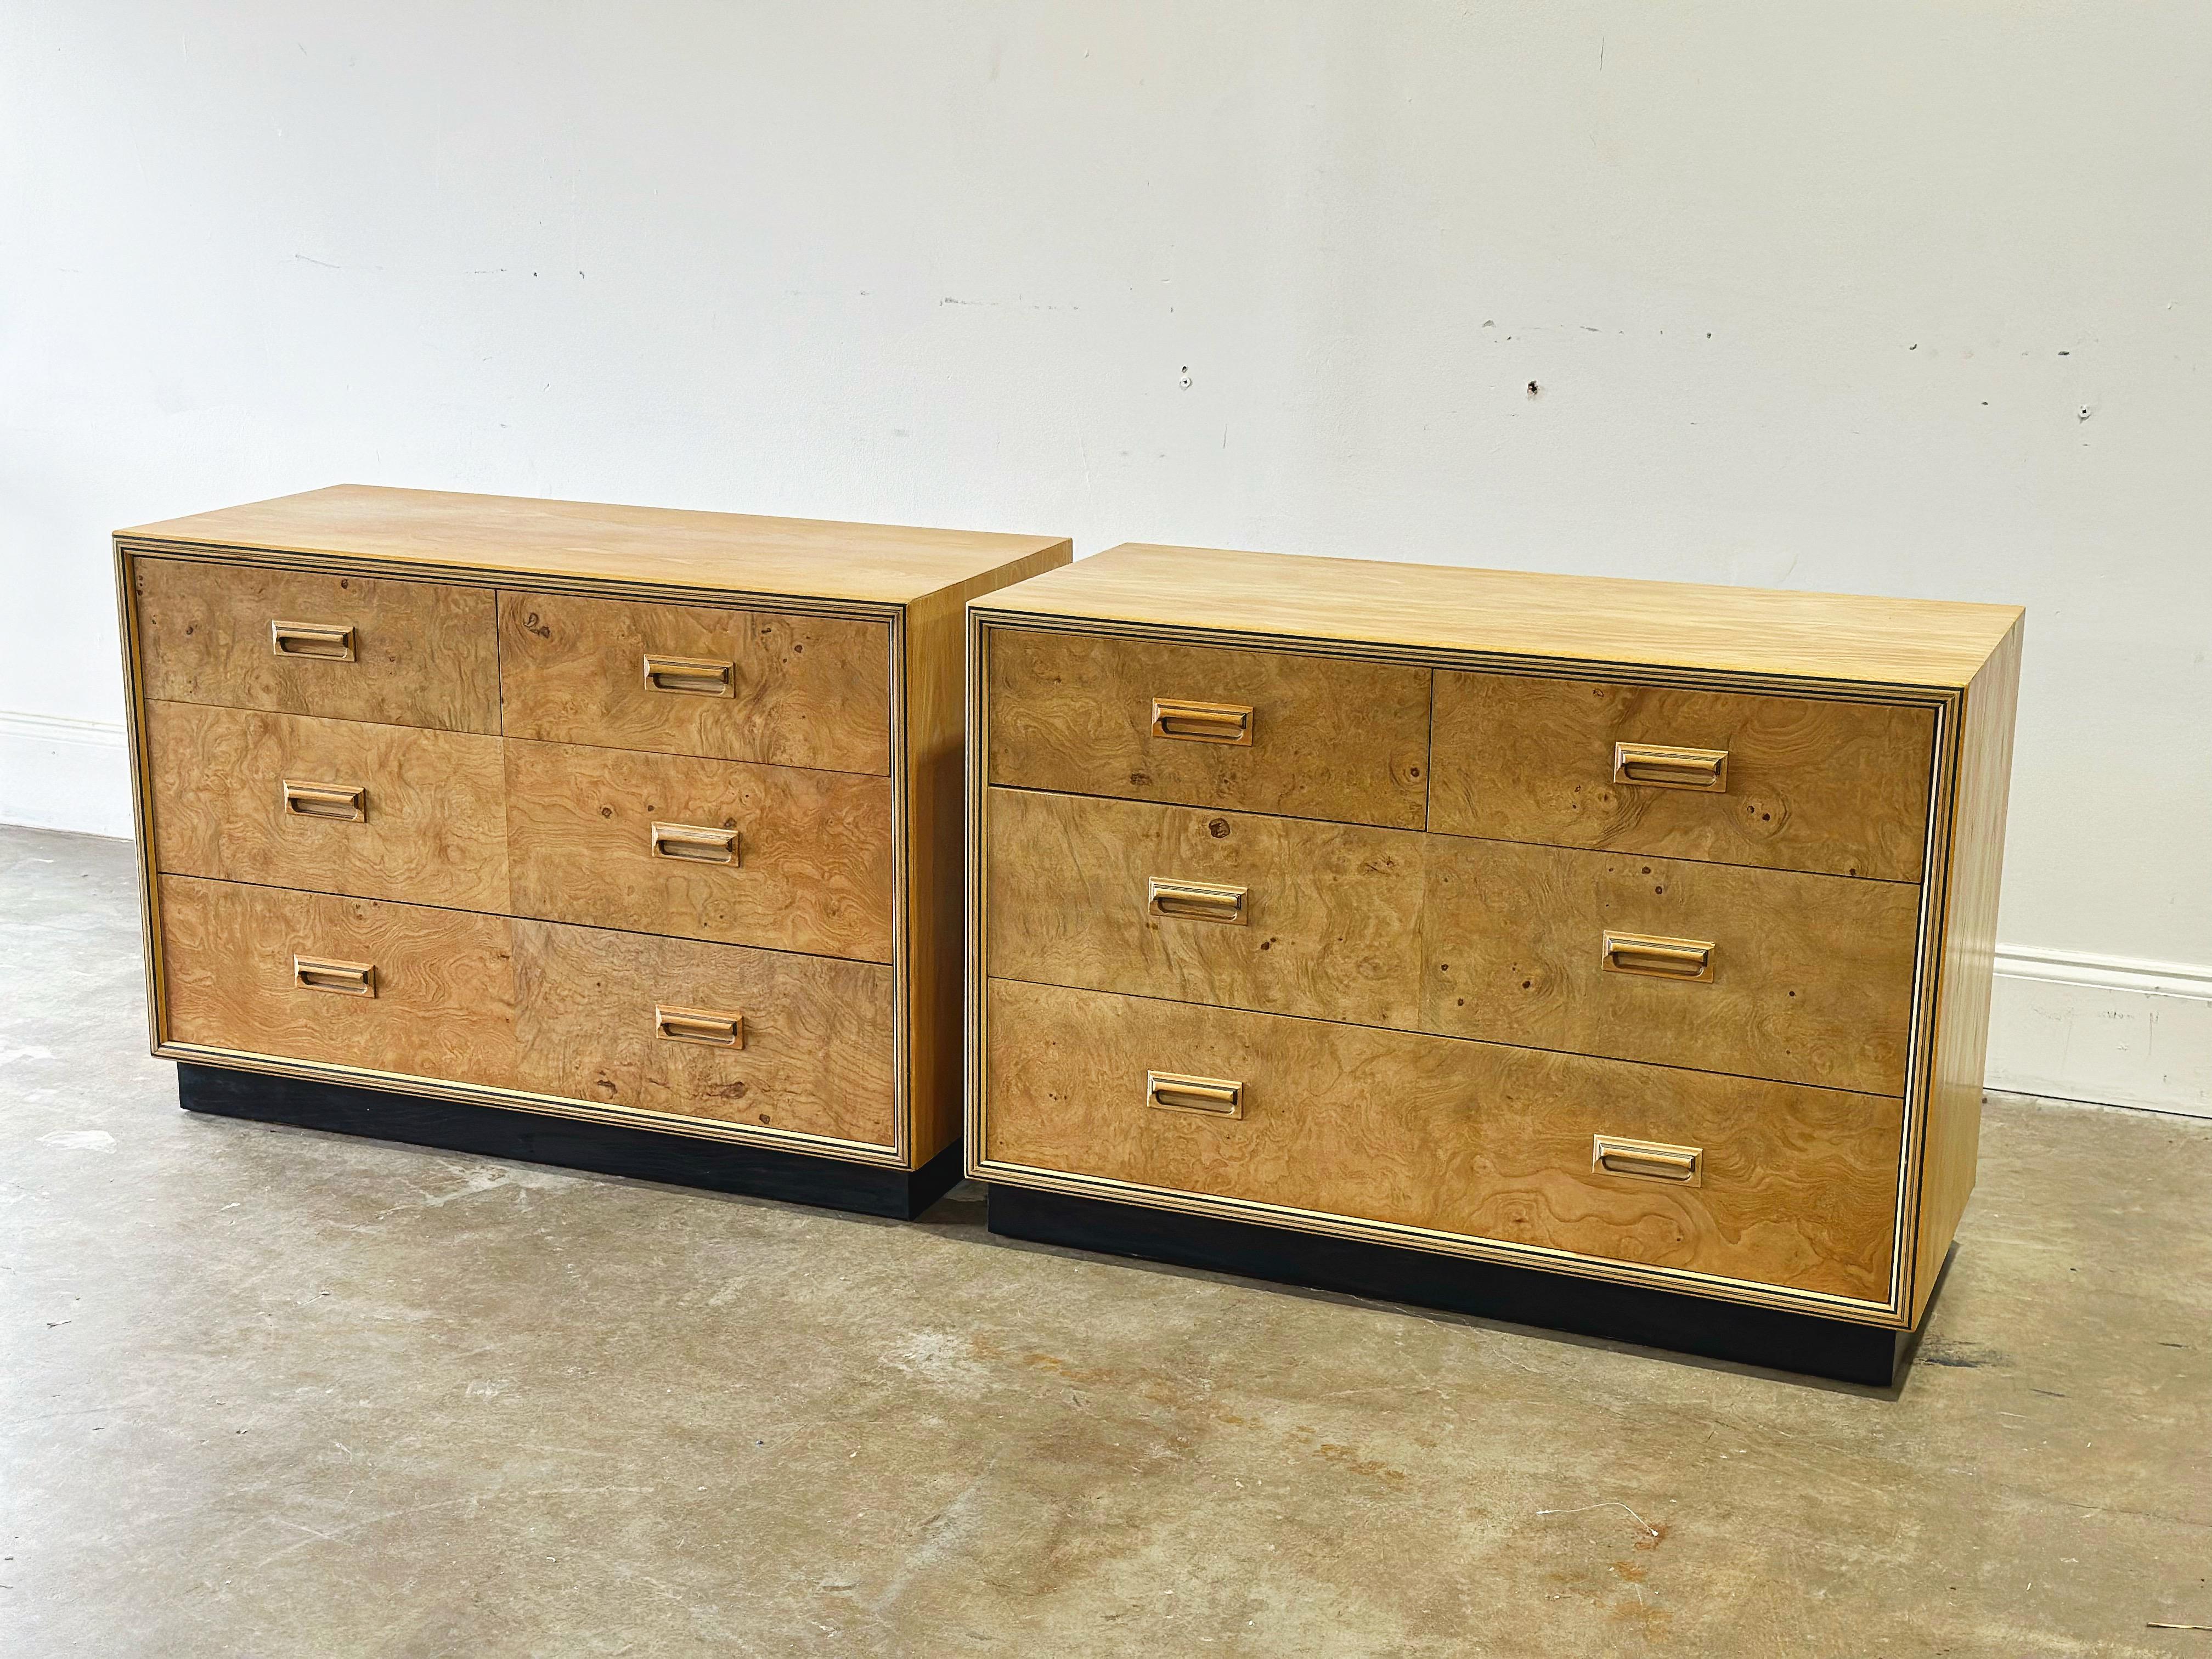 Ash Pair Burl Dressers, Henredon Scene Two, Modern Burled Nightstands or Chests